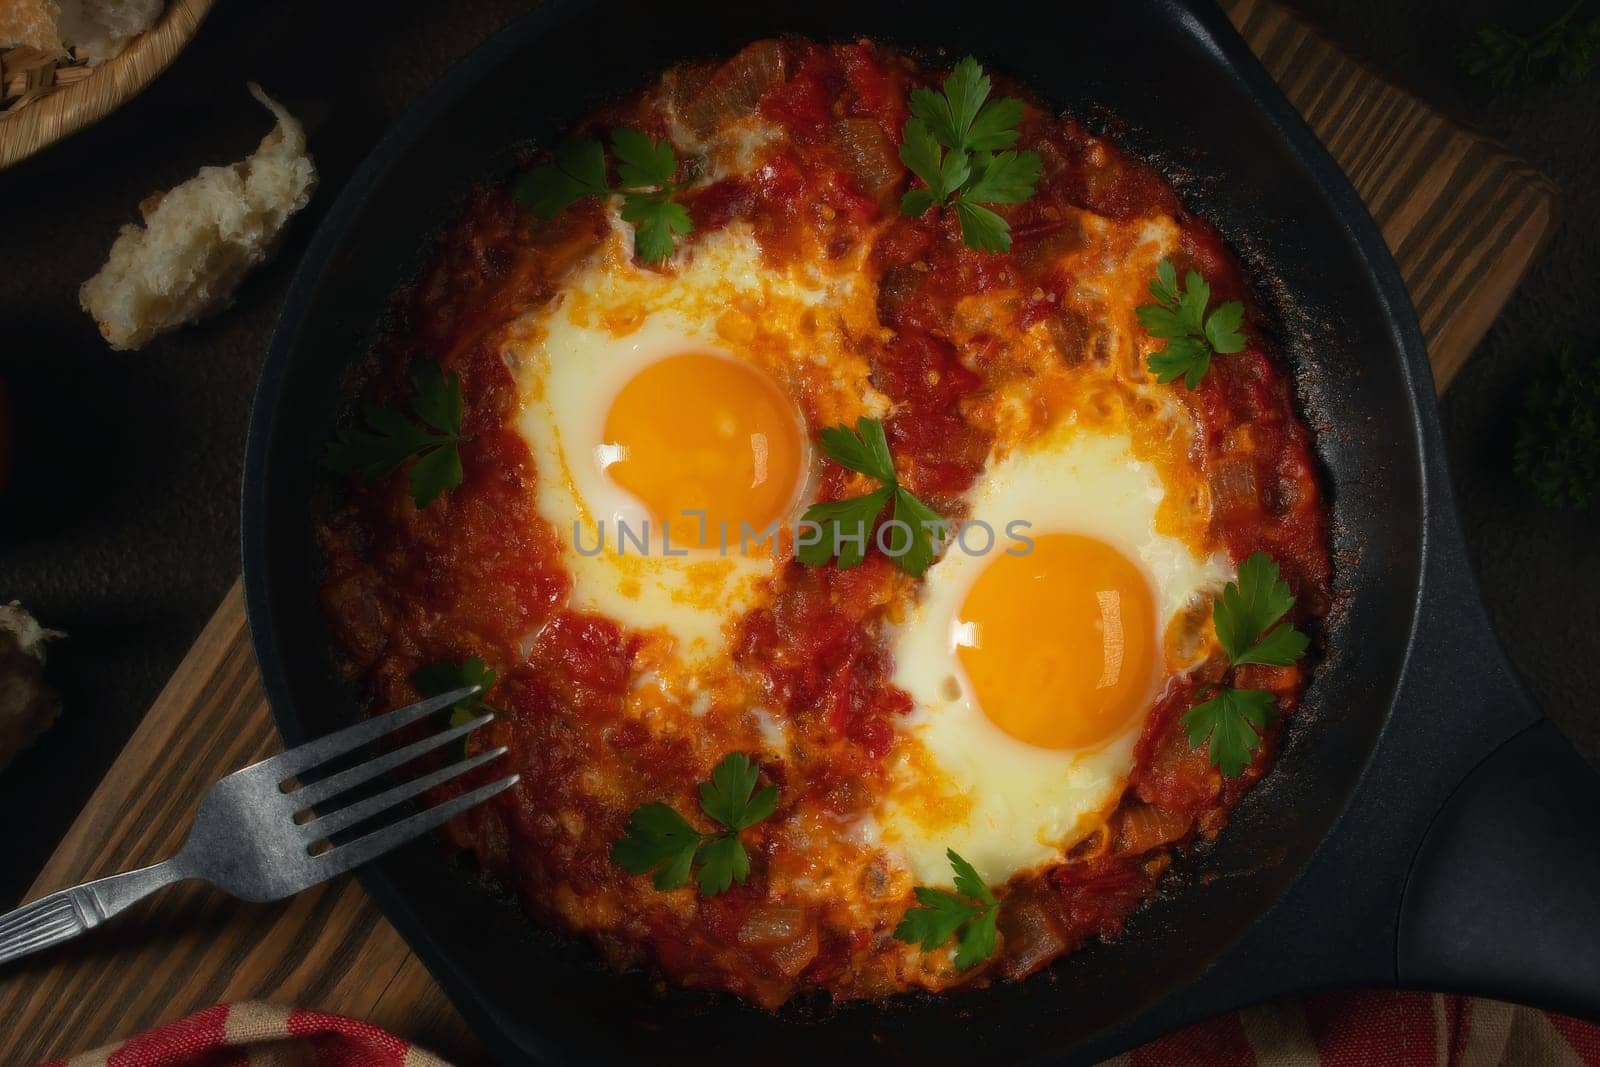 Shakshuka from two eggs in tomato sauce with fresh tomatoes, spices and herbs in a black frying pan. Close-up scrambled eggs.